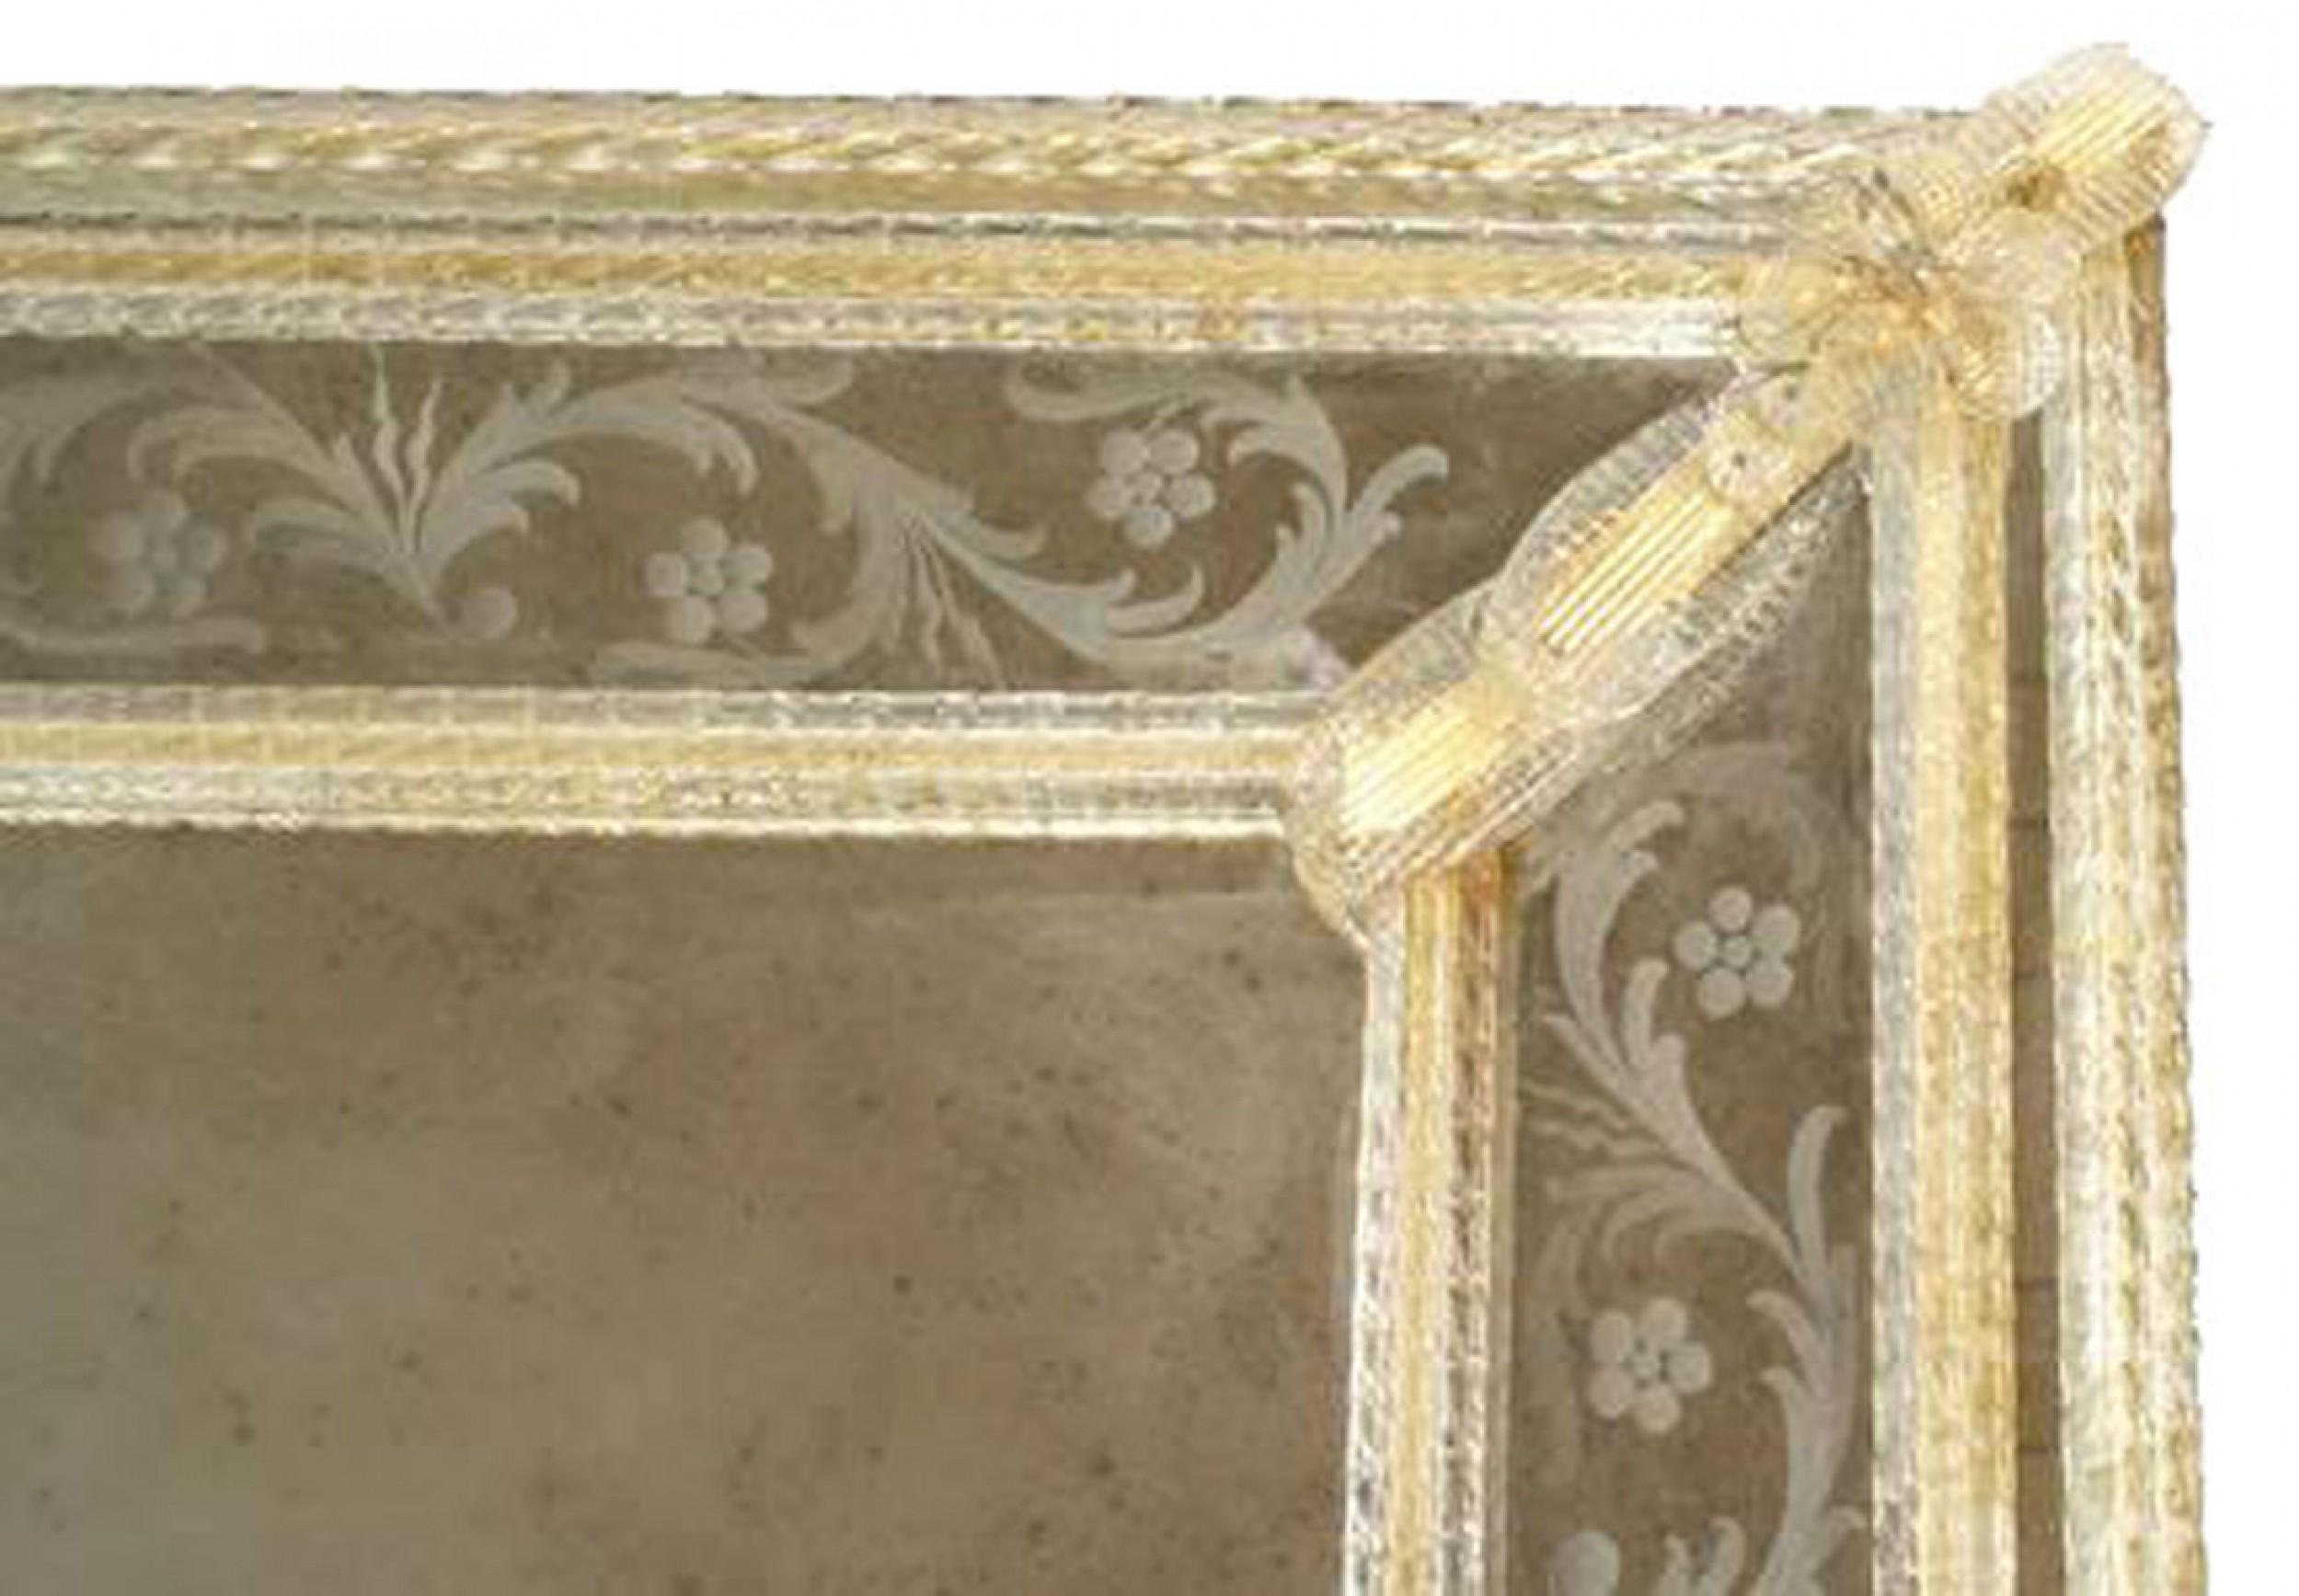 Italian Venetian Murano wall mirror with etched floral and scroll design border, applied gold dusted glass leaves, and spindle trim. (ONGARO E FUGA).